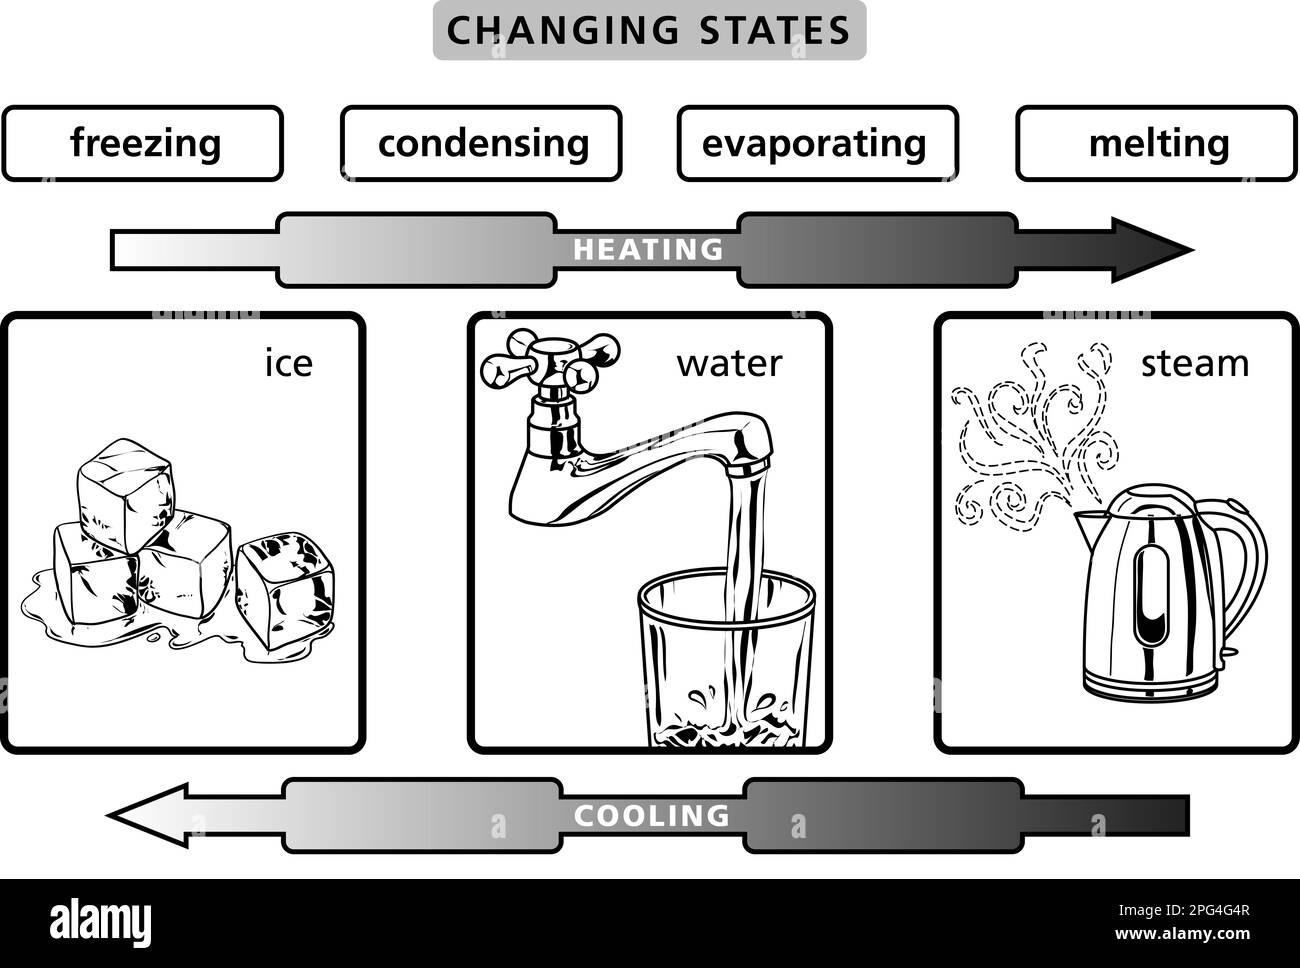 https://c8.alamy.com/comp/2PG4G4R/scientific-illustration-diagram-how-to-art-work-showing-changing-states-from-ice-to-water-to-steam-via-freezing-condensing-evaporating-melting-2PG4G4R.jpg